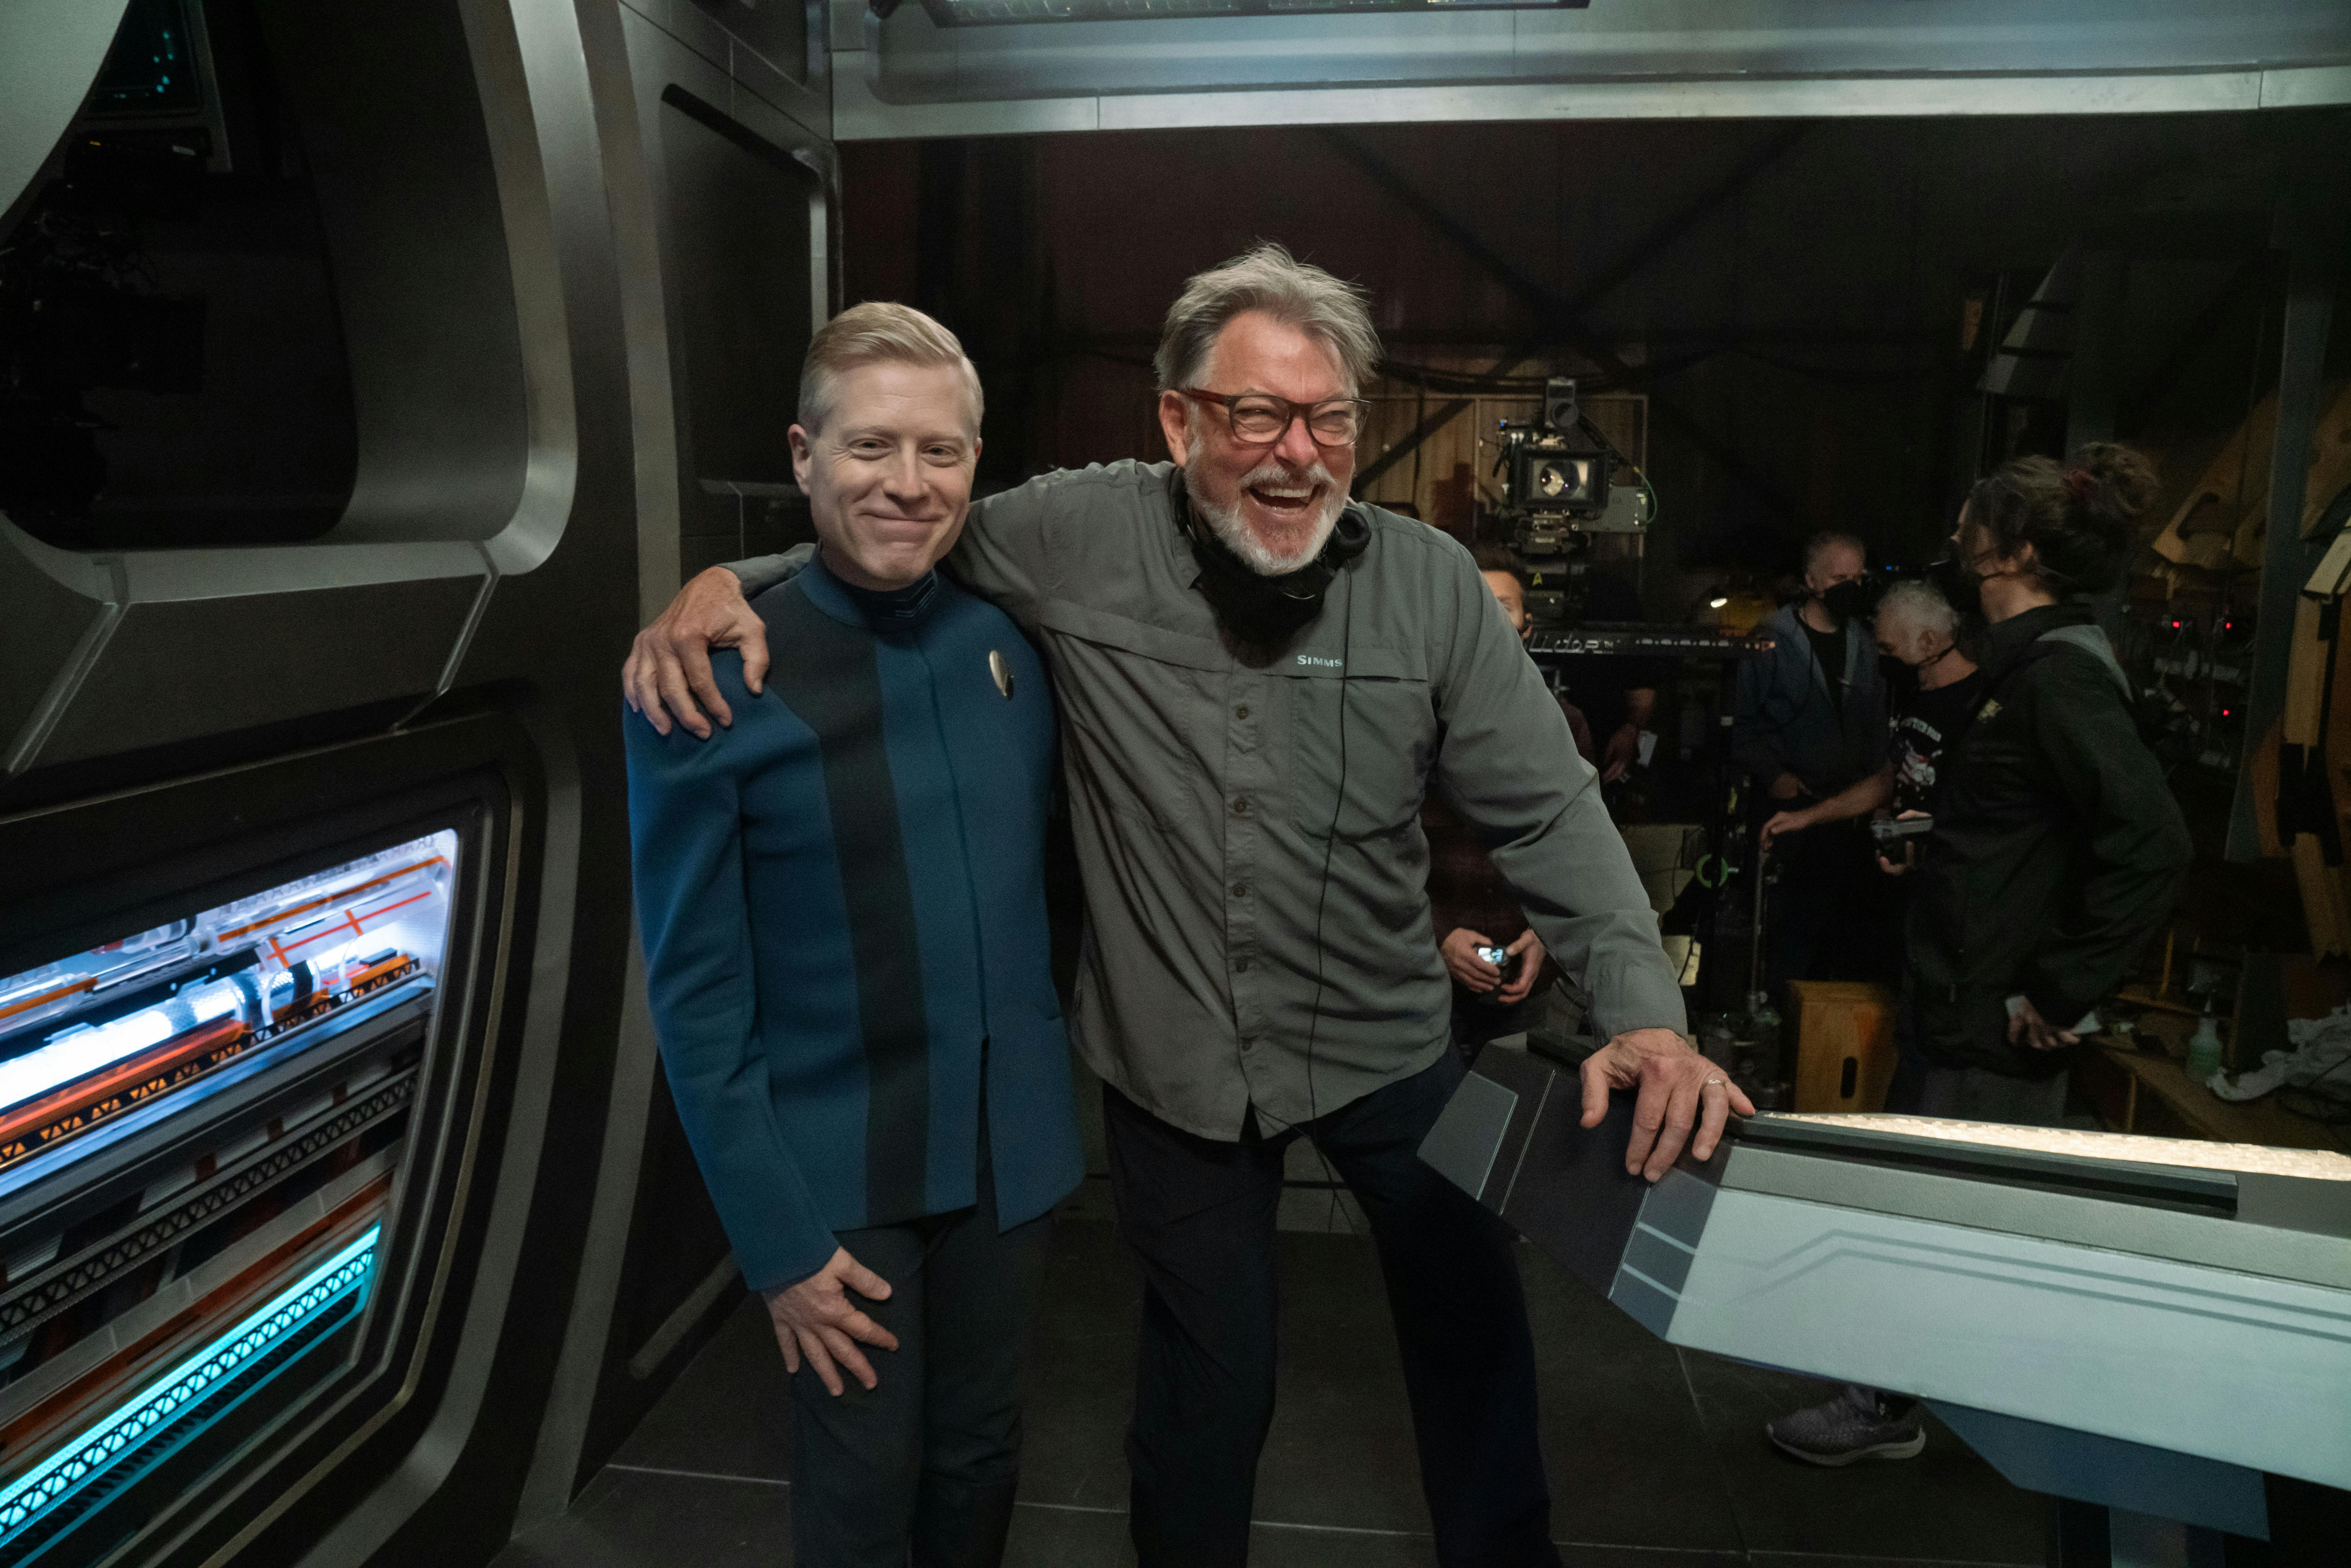 Behind-the-scenes of 'Lagrange Point' - Jonathan Frakes heartily laughs as he places his arm around Anthony Rapp's shoulders on the set of Discovery's engineering lab